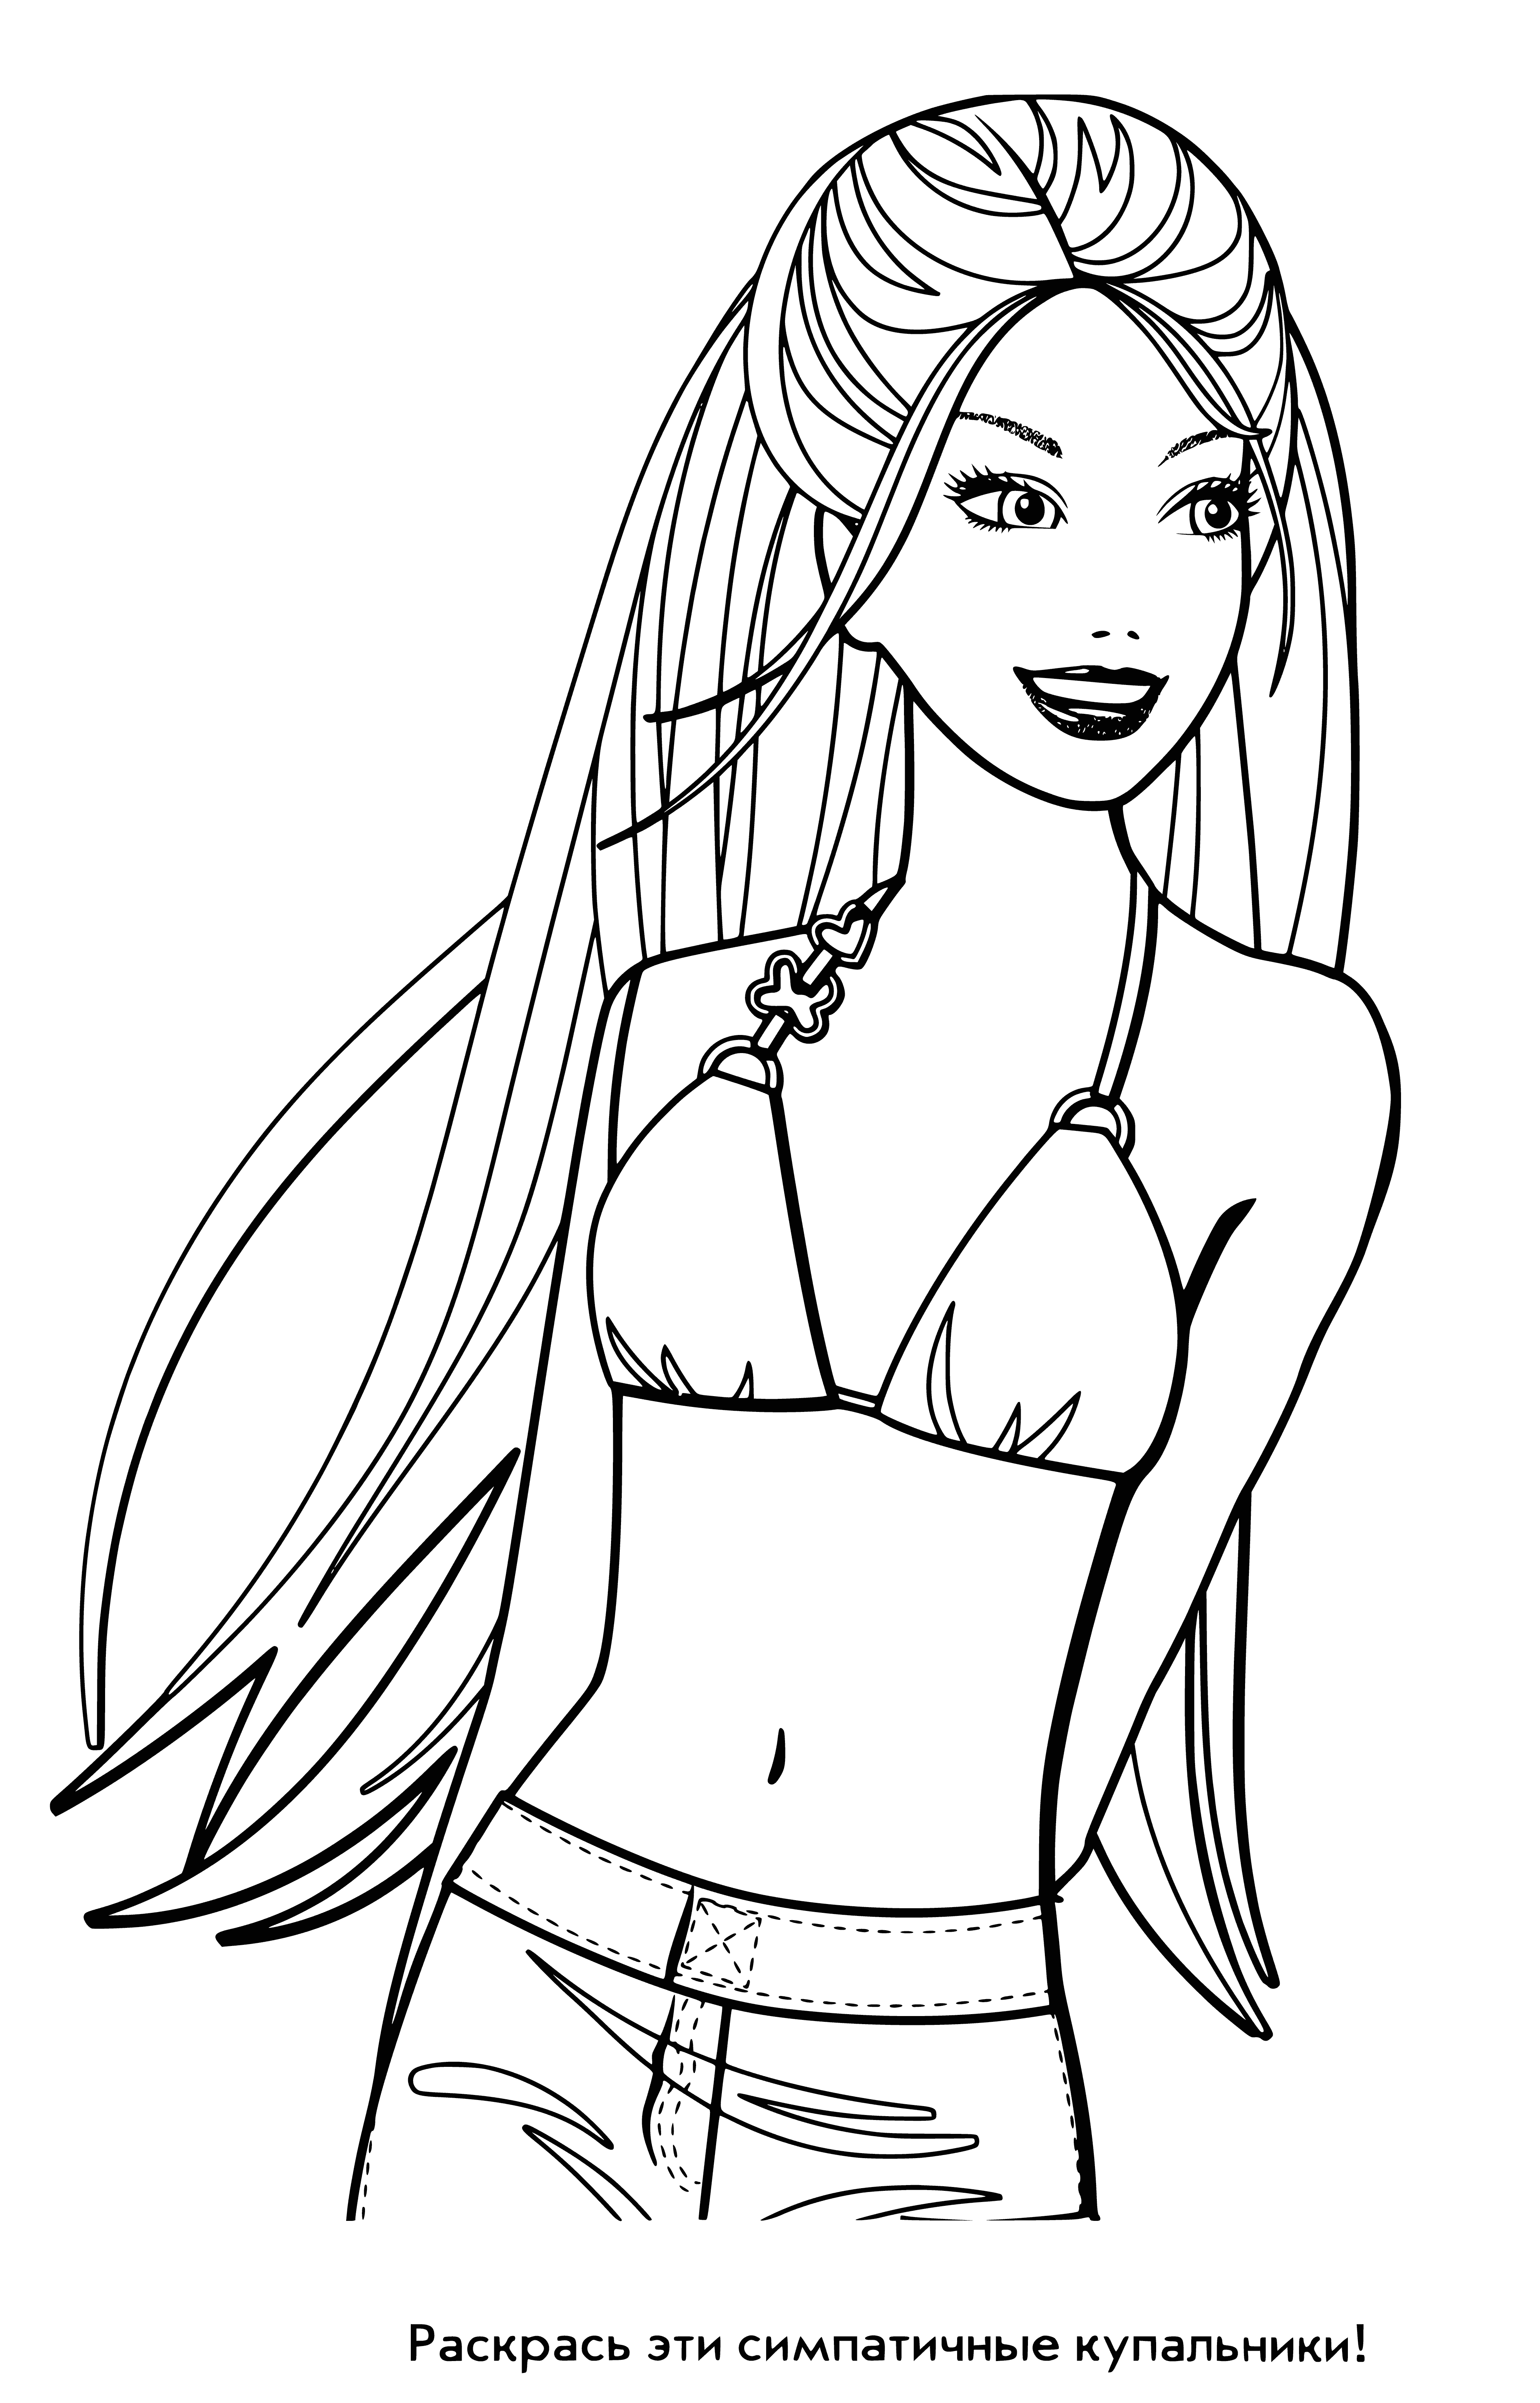 coloring page: Barbie in a polka dot swimsuit and striped ribbon. Holding a purple beach ball and wearing sunglasses.